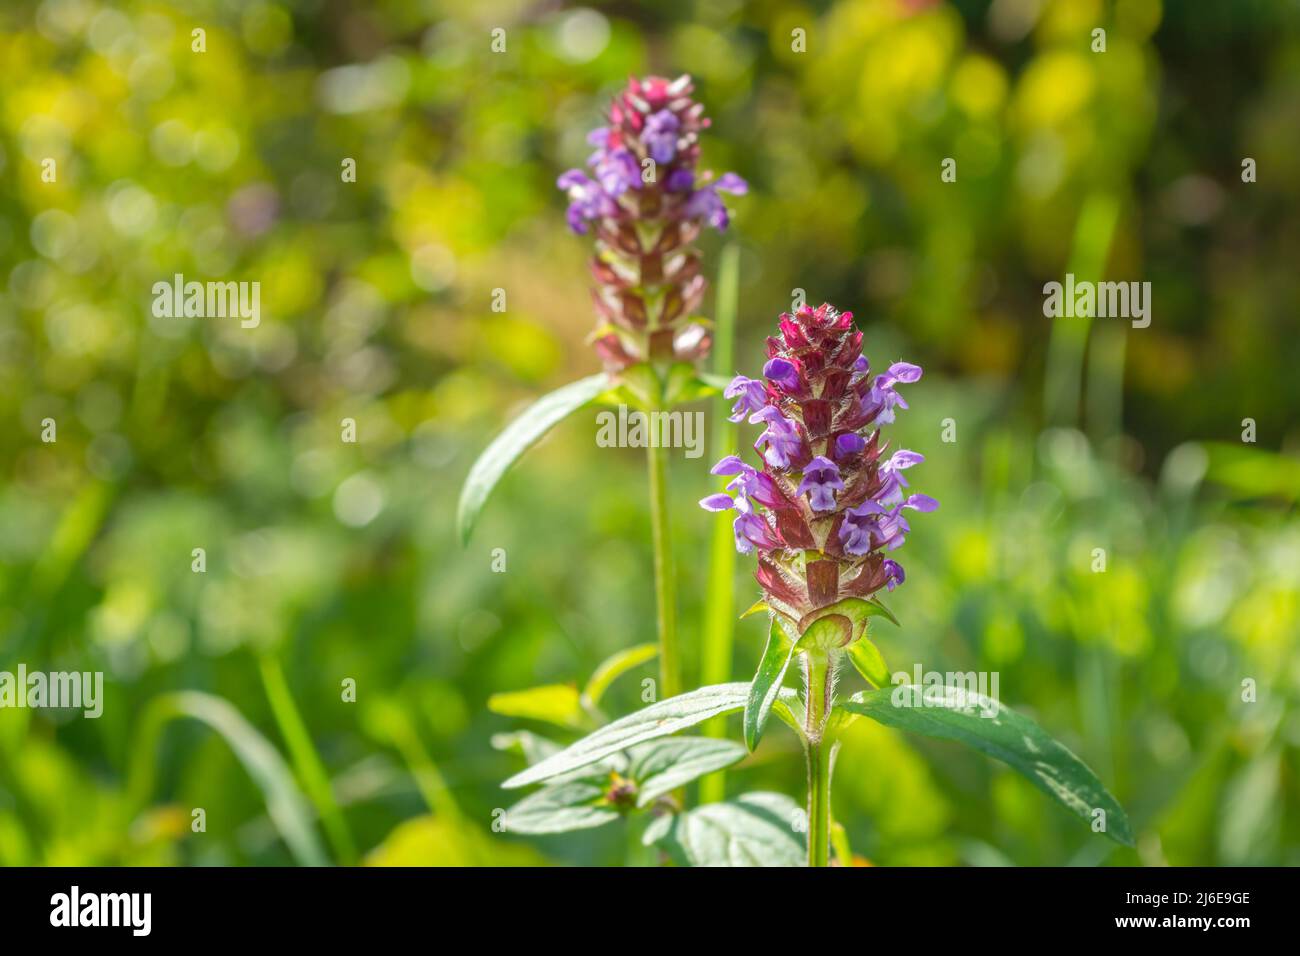 Betonica officinalis, a perennial herbaceous plant. Medicinal plants and herbs, botany. Flowers close-up. Summer background. Stock Photo